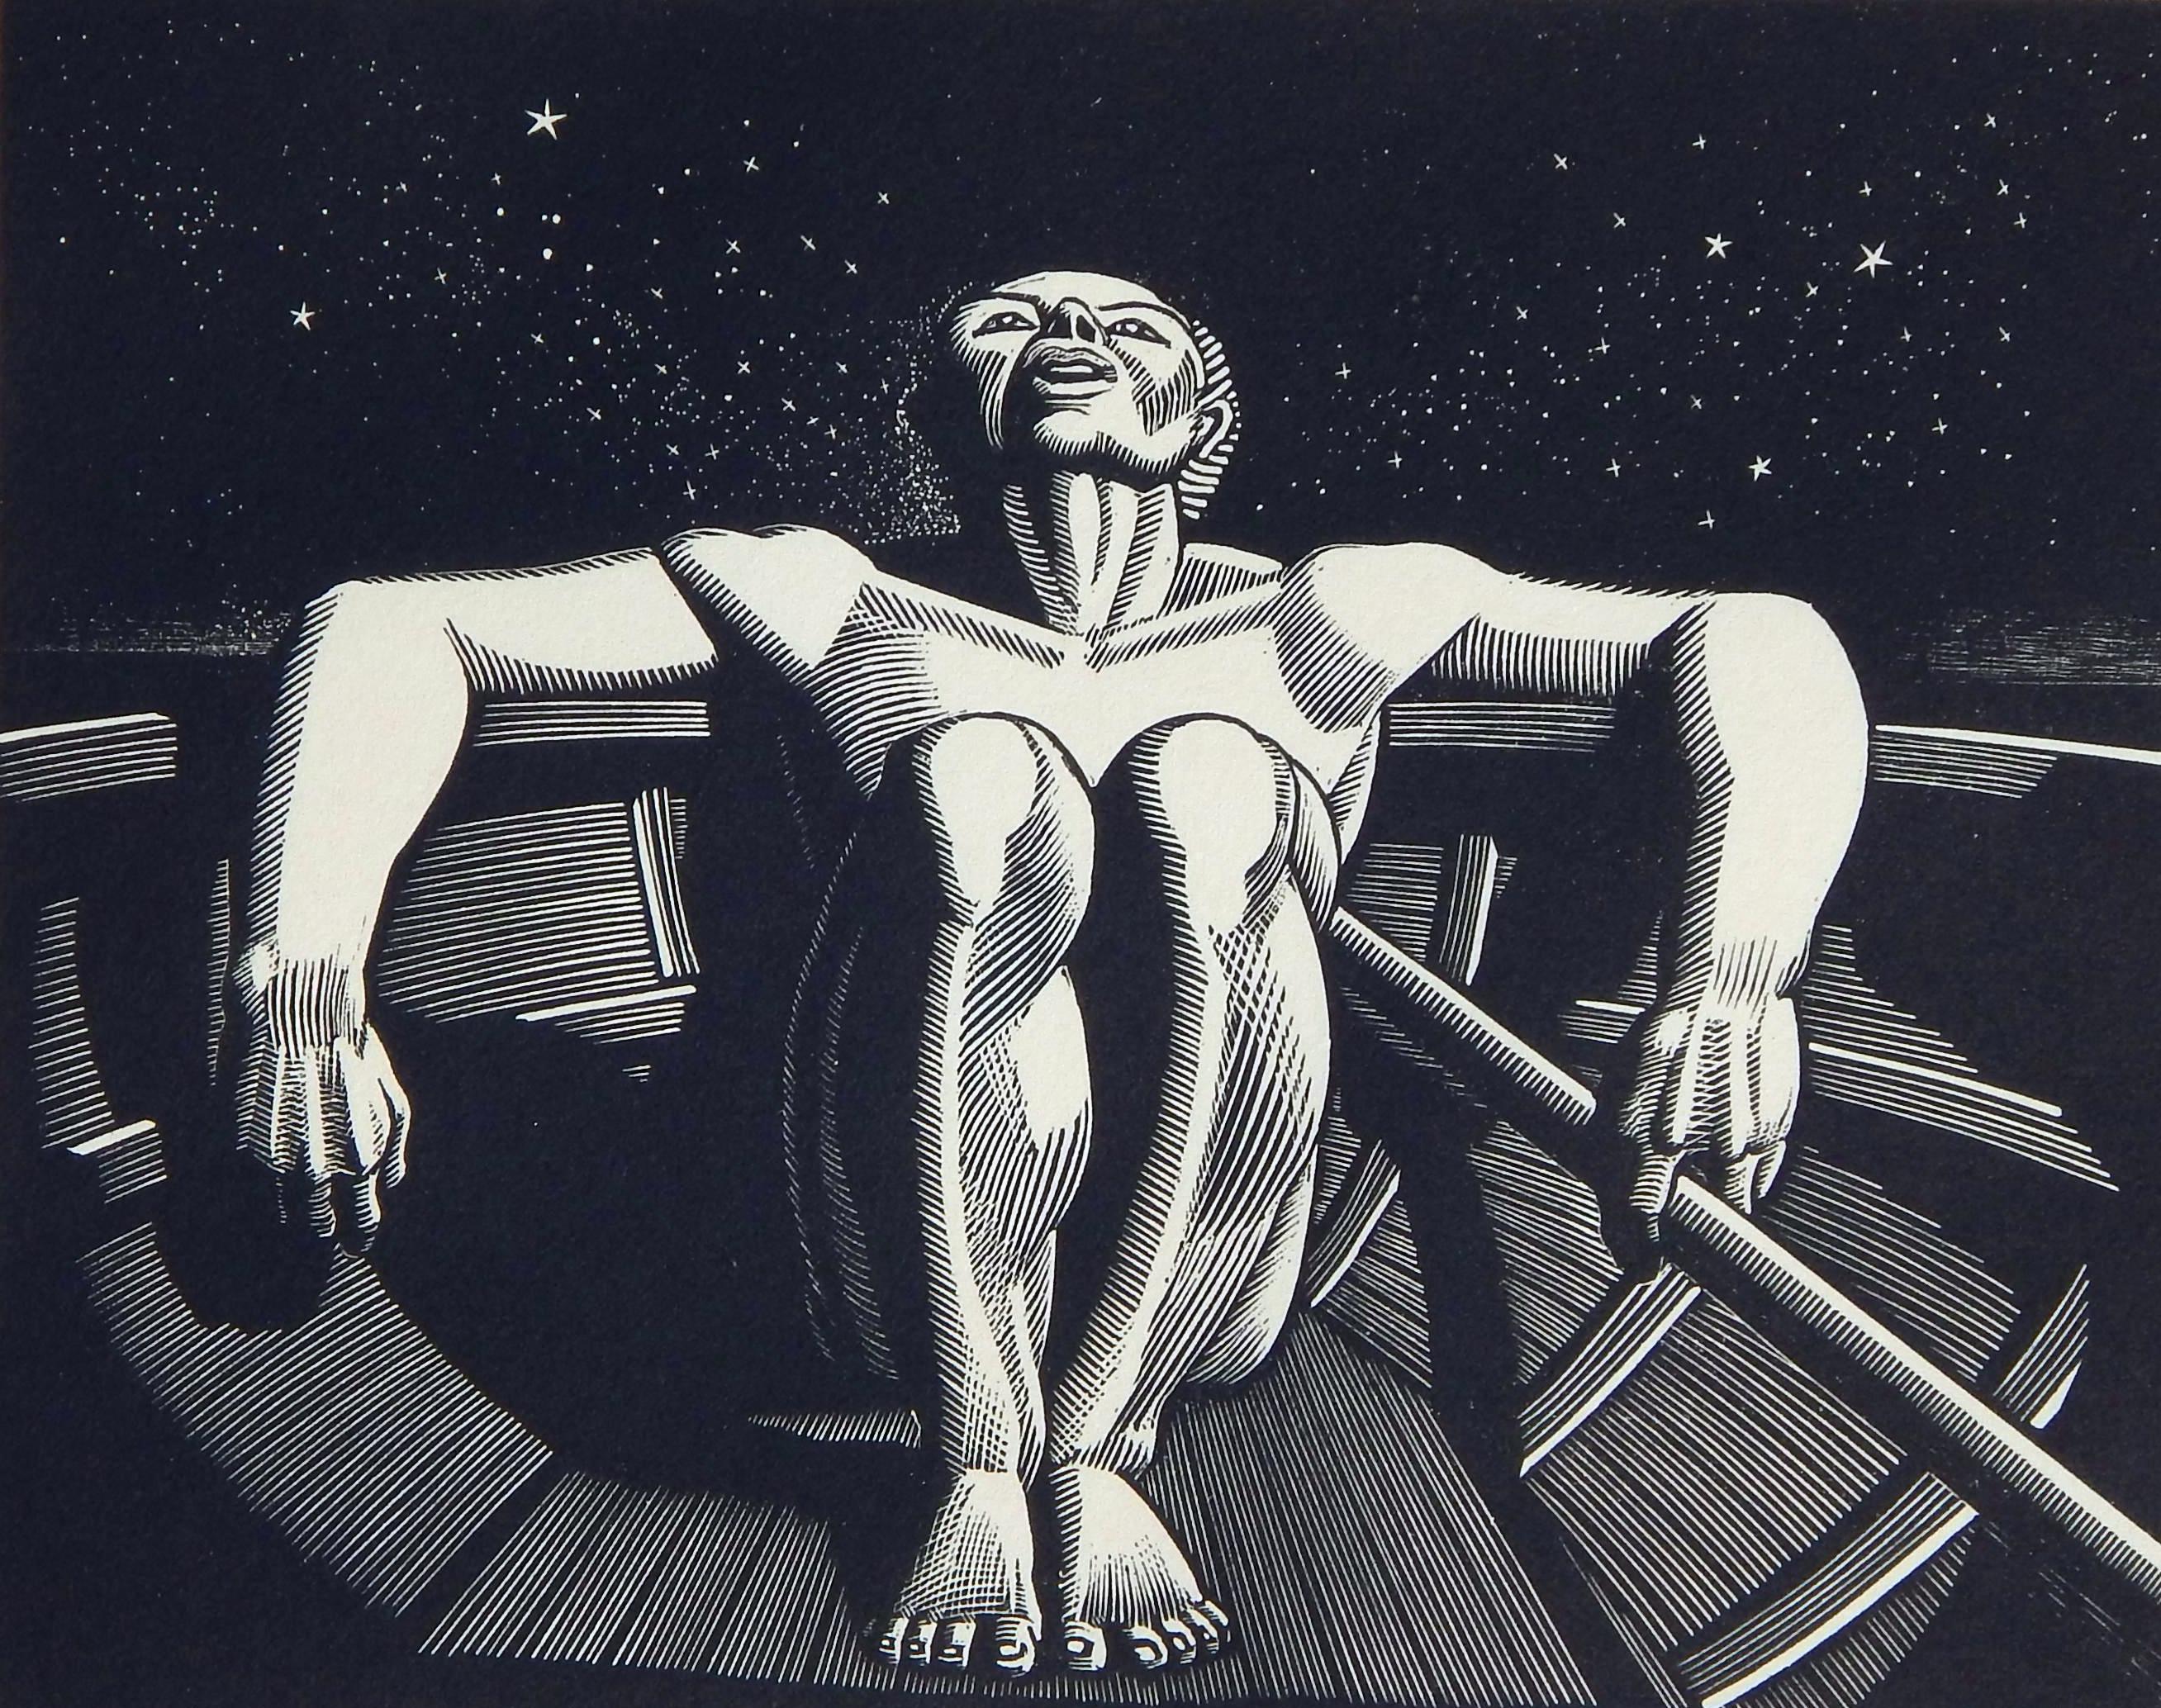 Rockwell Kent original wood engraving, 1933.
Signed in pencil lower right. 5.38